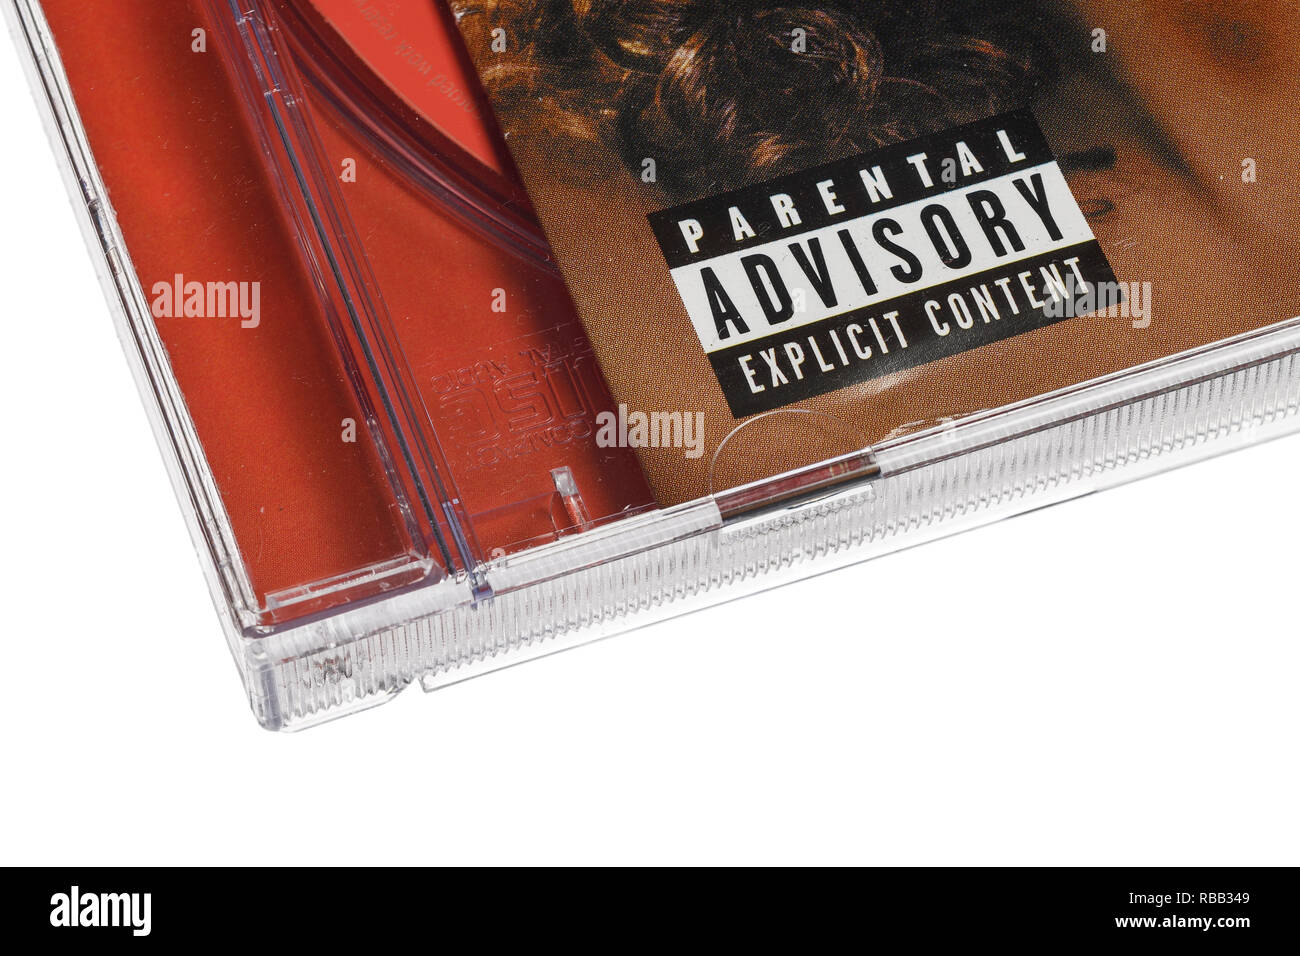 A Parental Advisory label on a compact disc case Stock Photo